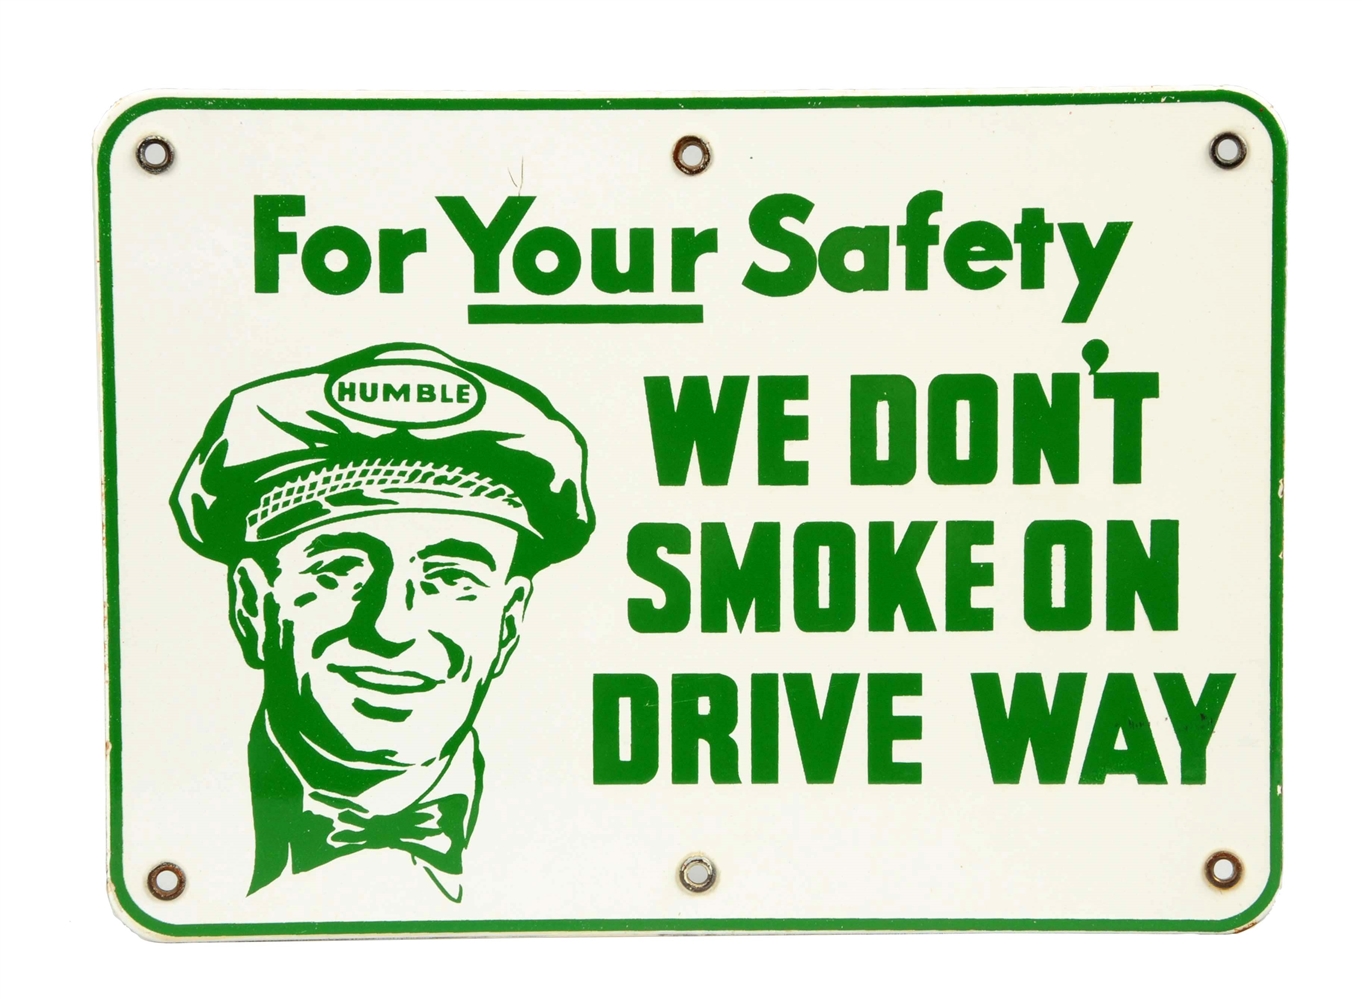 HUMBLE "WE DONT SMOKE ON DRIVE WAY" PORCELAIN SIGN.